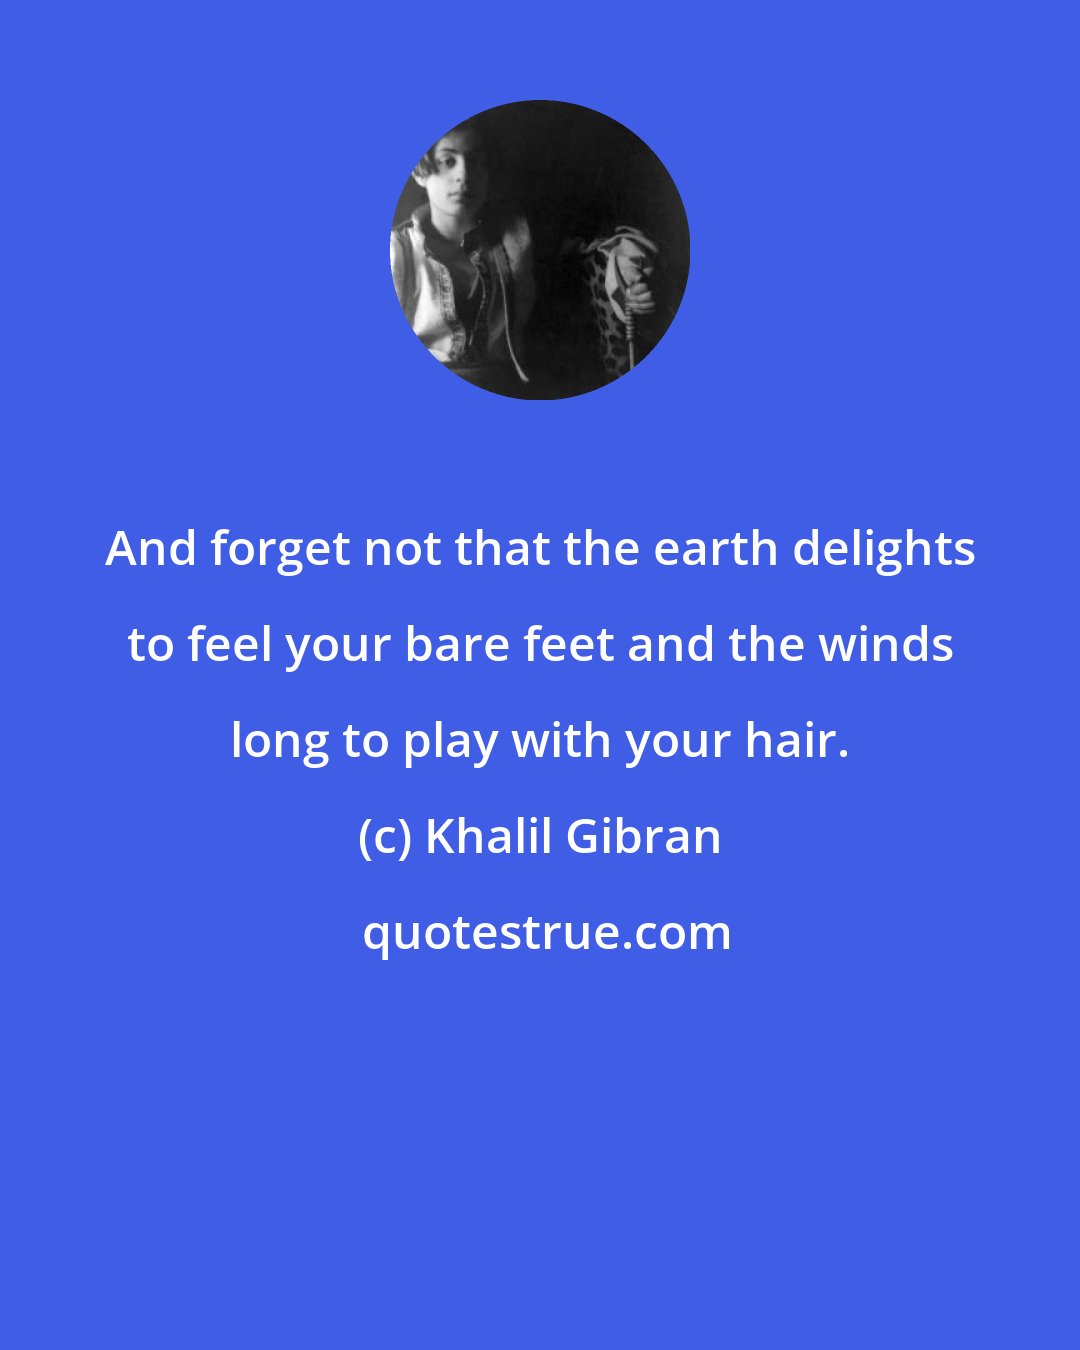 Khalil Gibran: And forget not that the earth delights to feel your bare feet and the winds long to play with your hair.